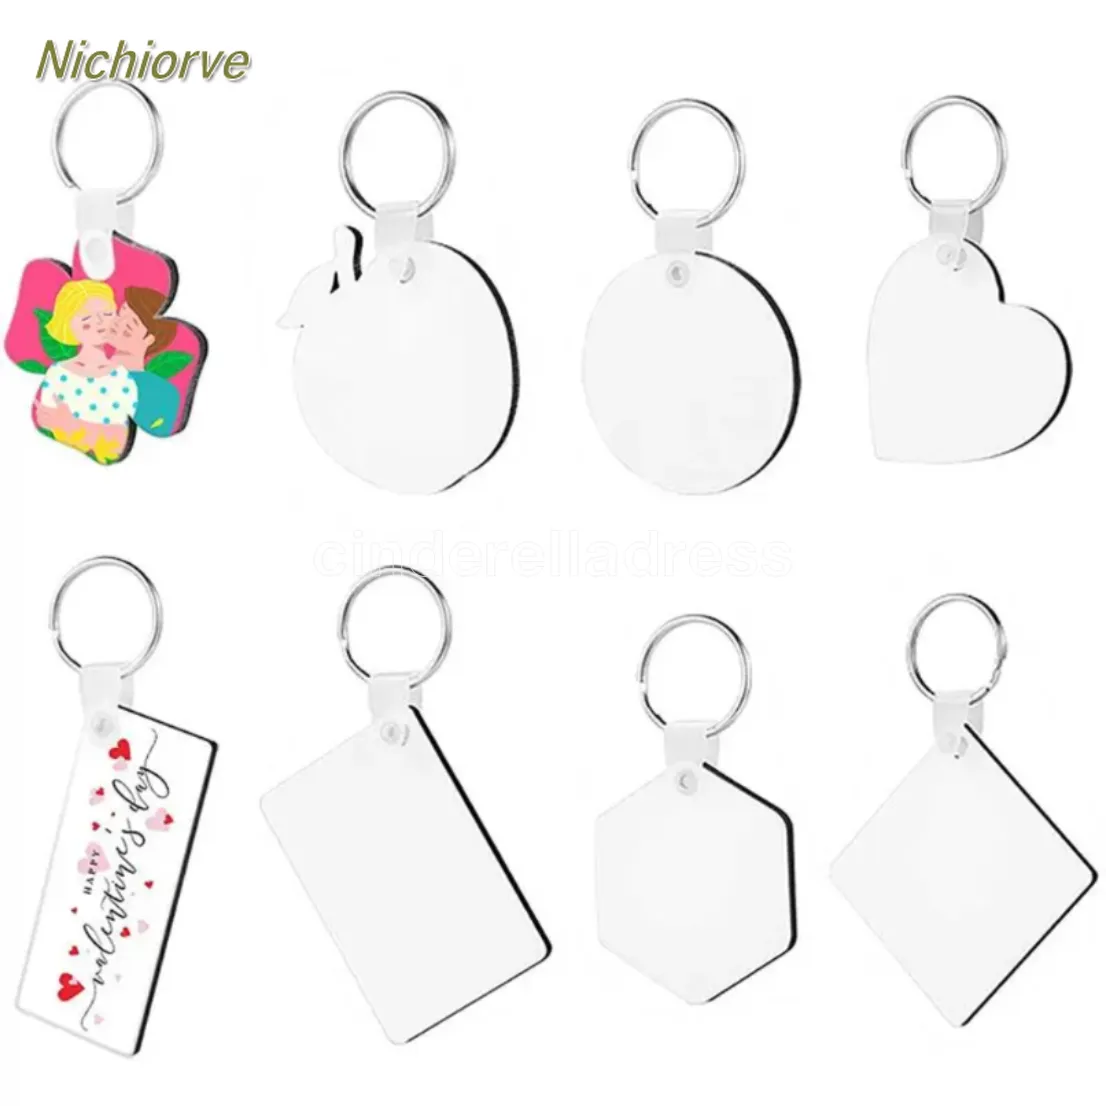 Blank Keychain Party Favor Designer Thermal Transfer Sublimation Personality Key Chain Ornament Wooden Keychains sxm3